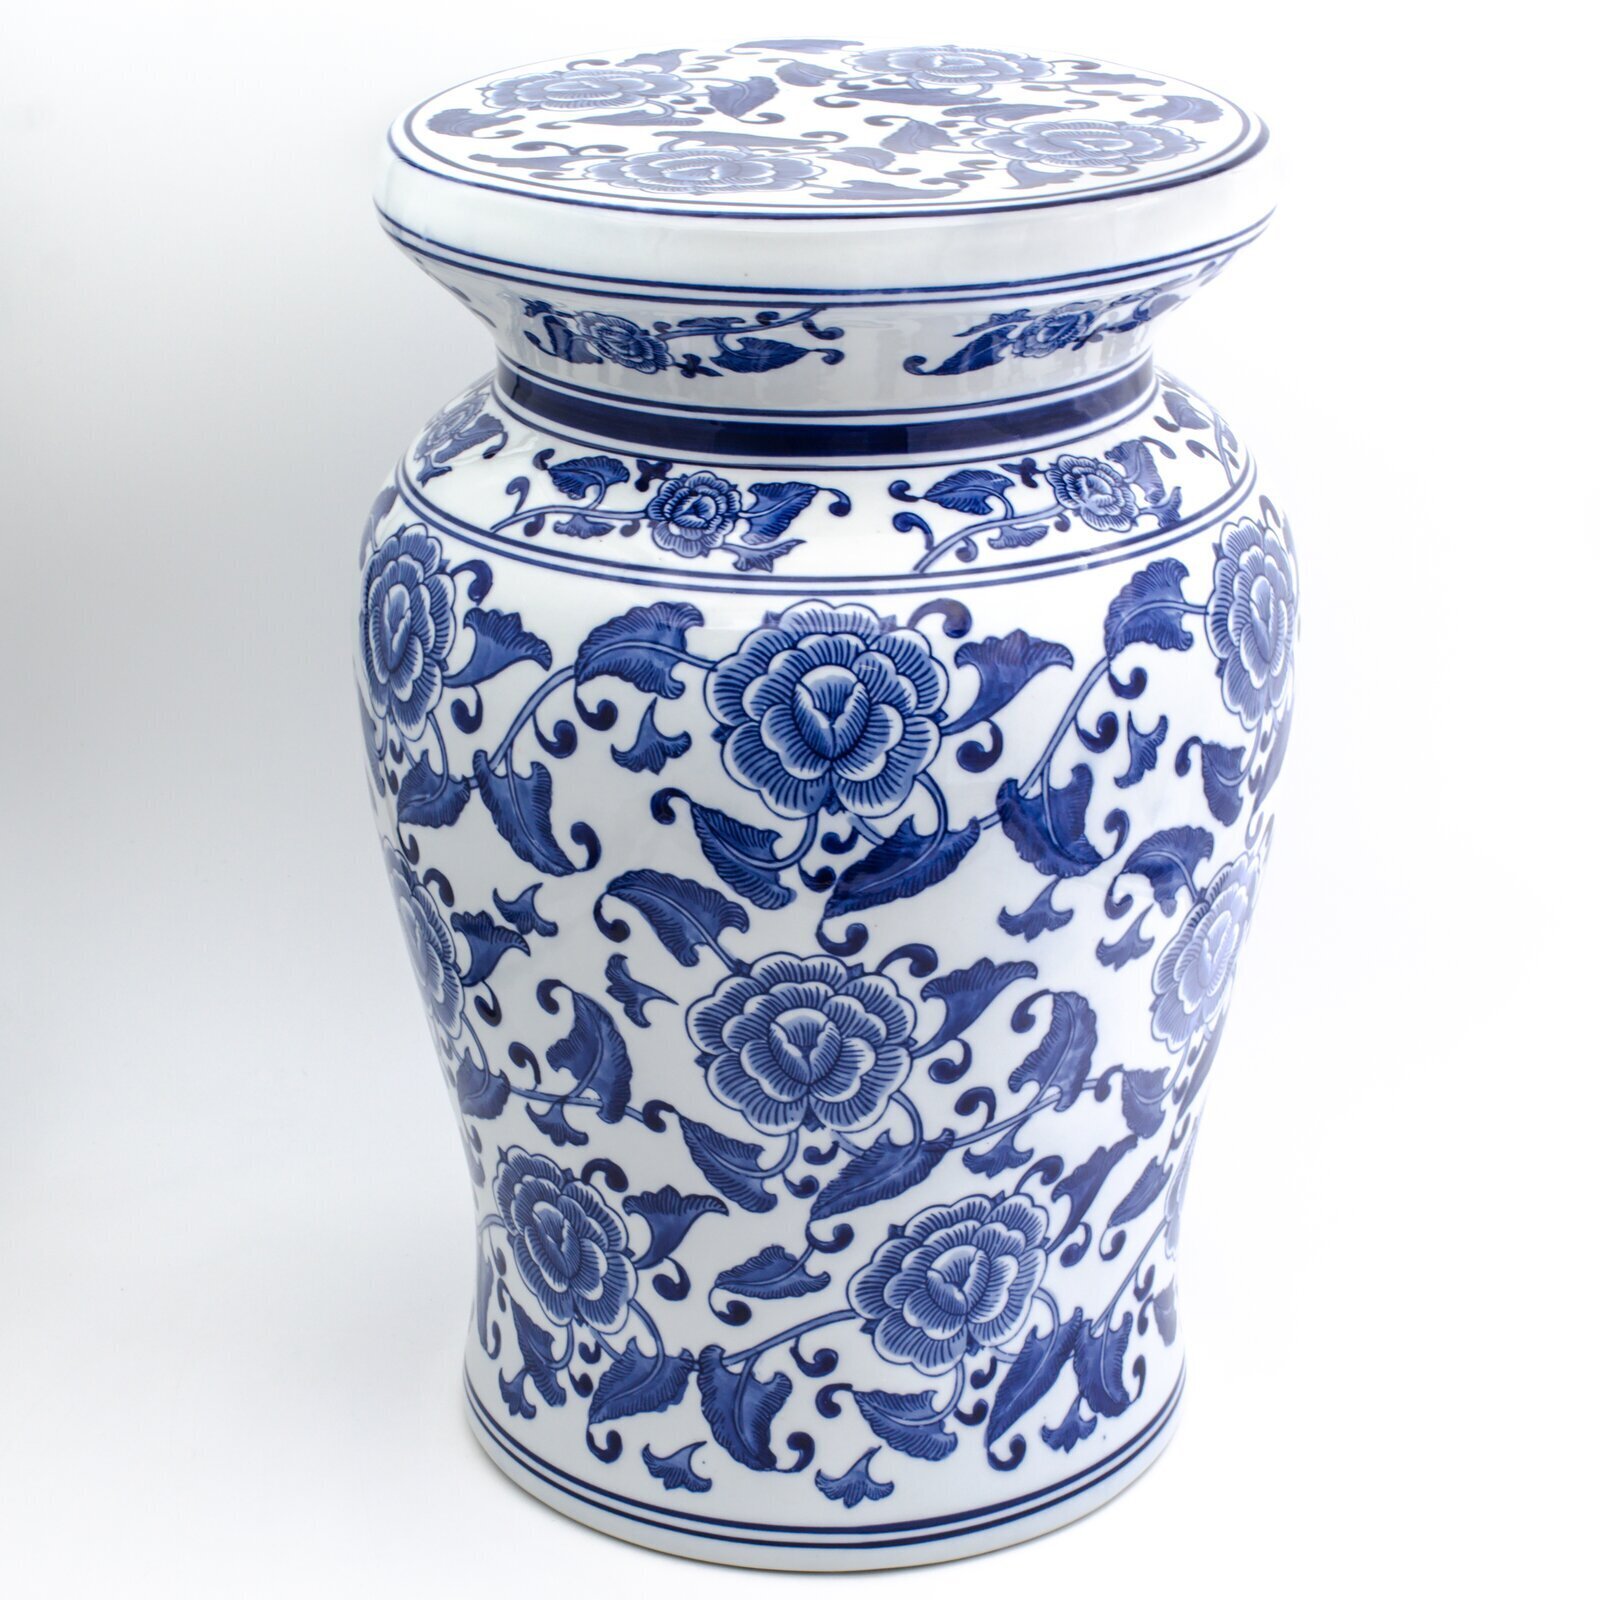 Vintage Cultural Blue and White Urn Stool